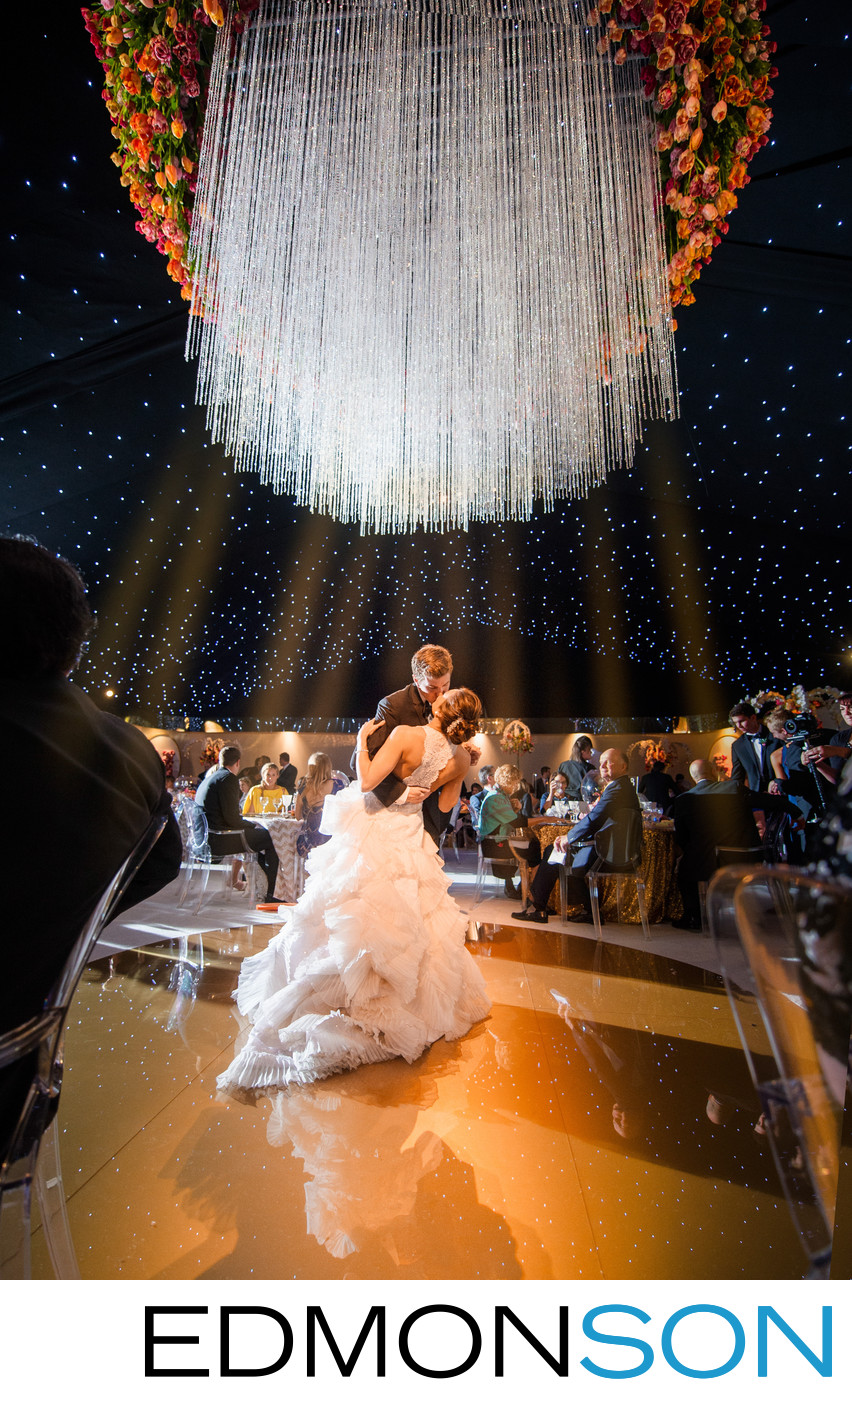 Huge Chandelier Transforms Tent During Epic First Dance